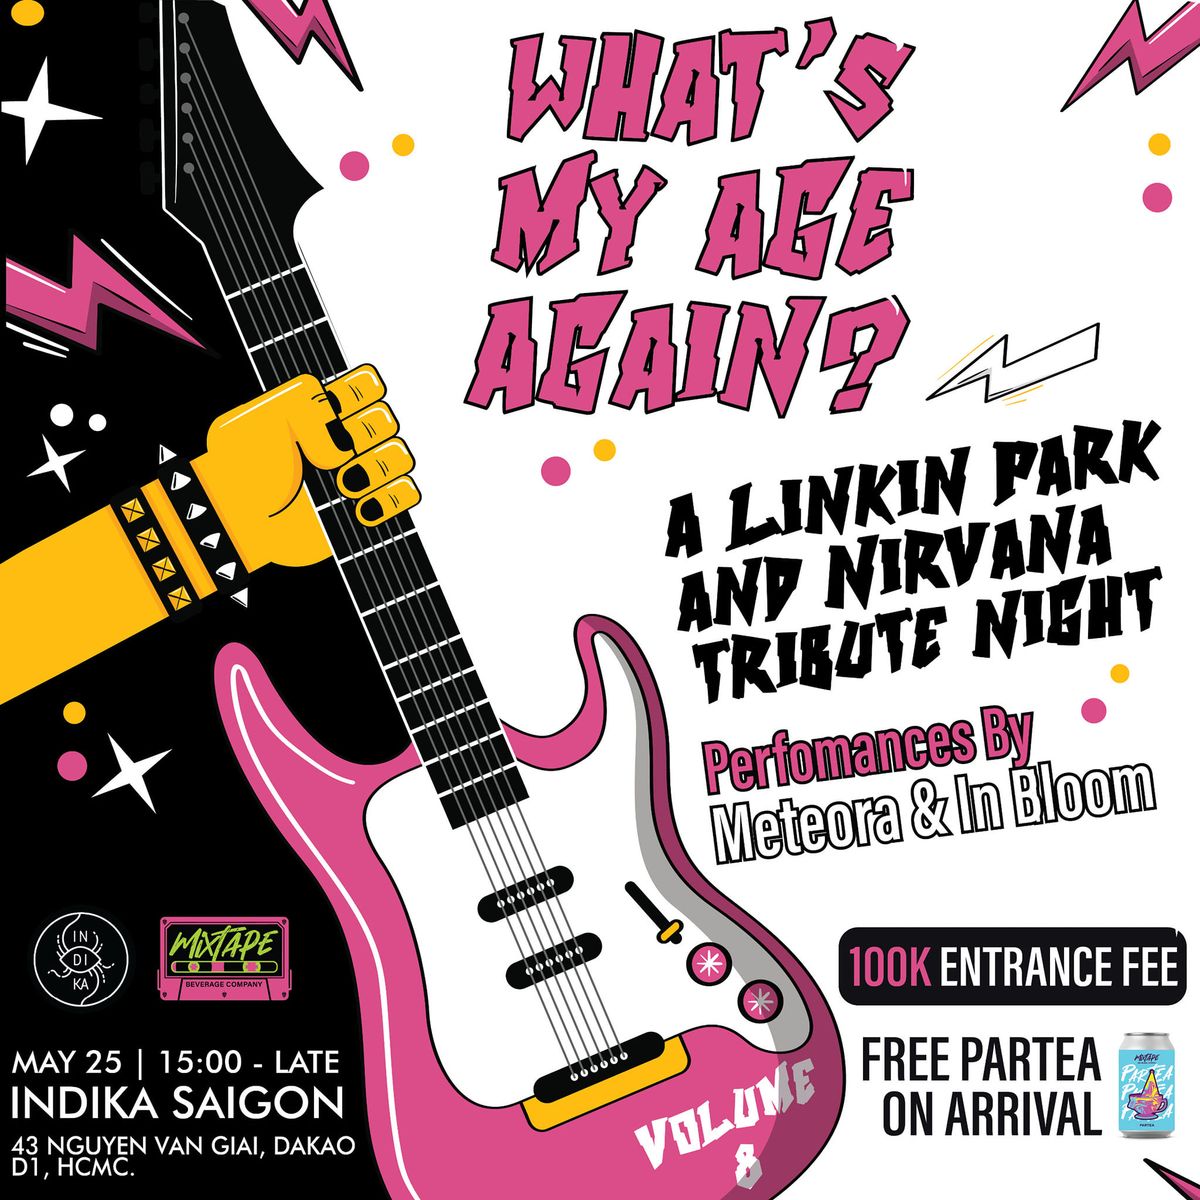 What's My Age Again - VOLUME 8 - A Linkin Park & Nirvana tribute night